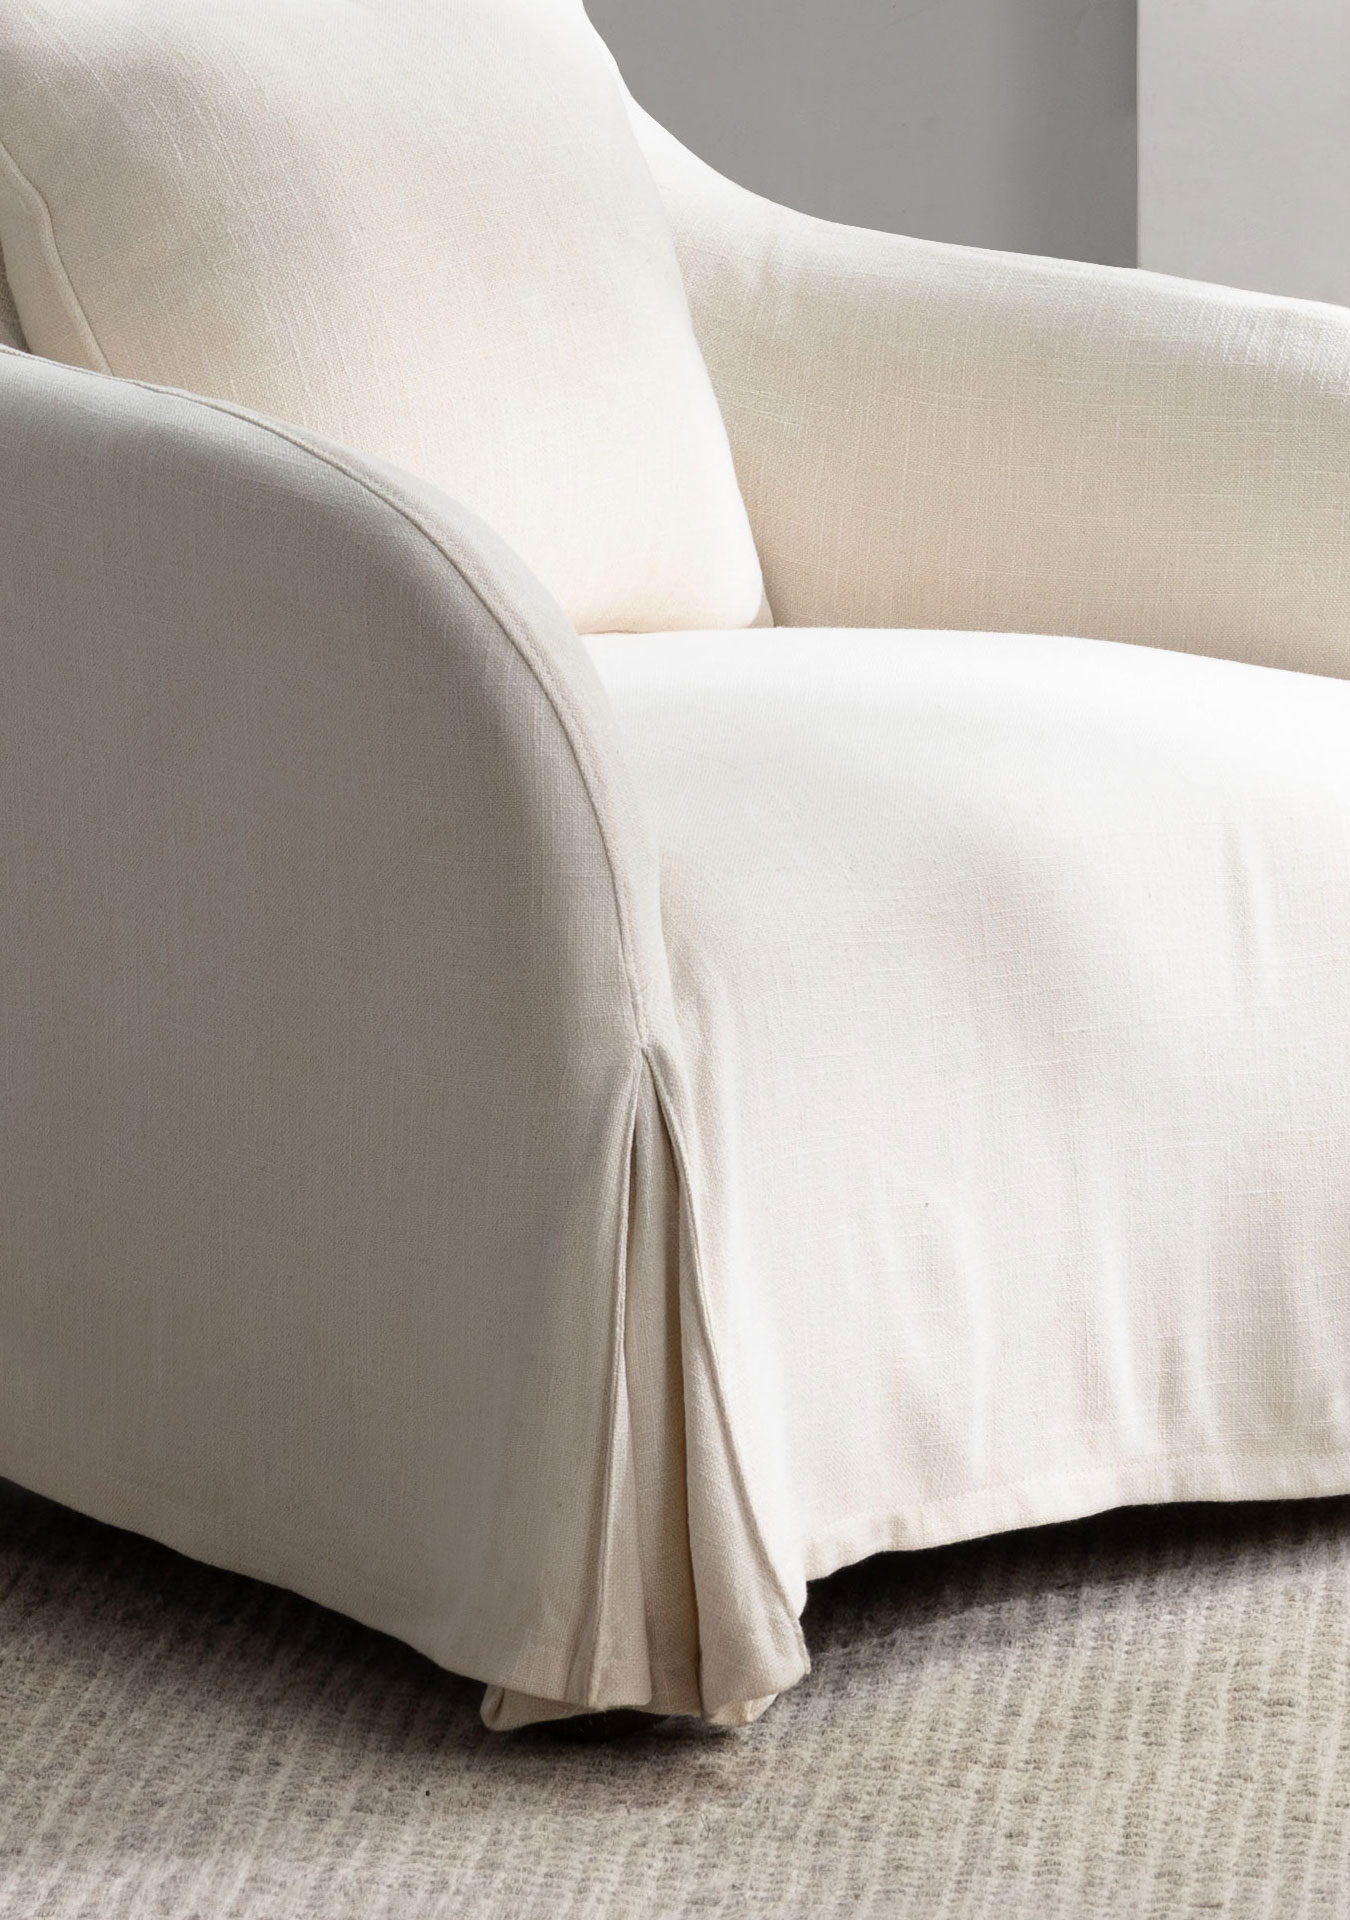 Cream slipcover accent chair Château Collection